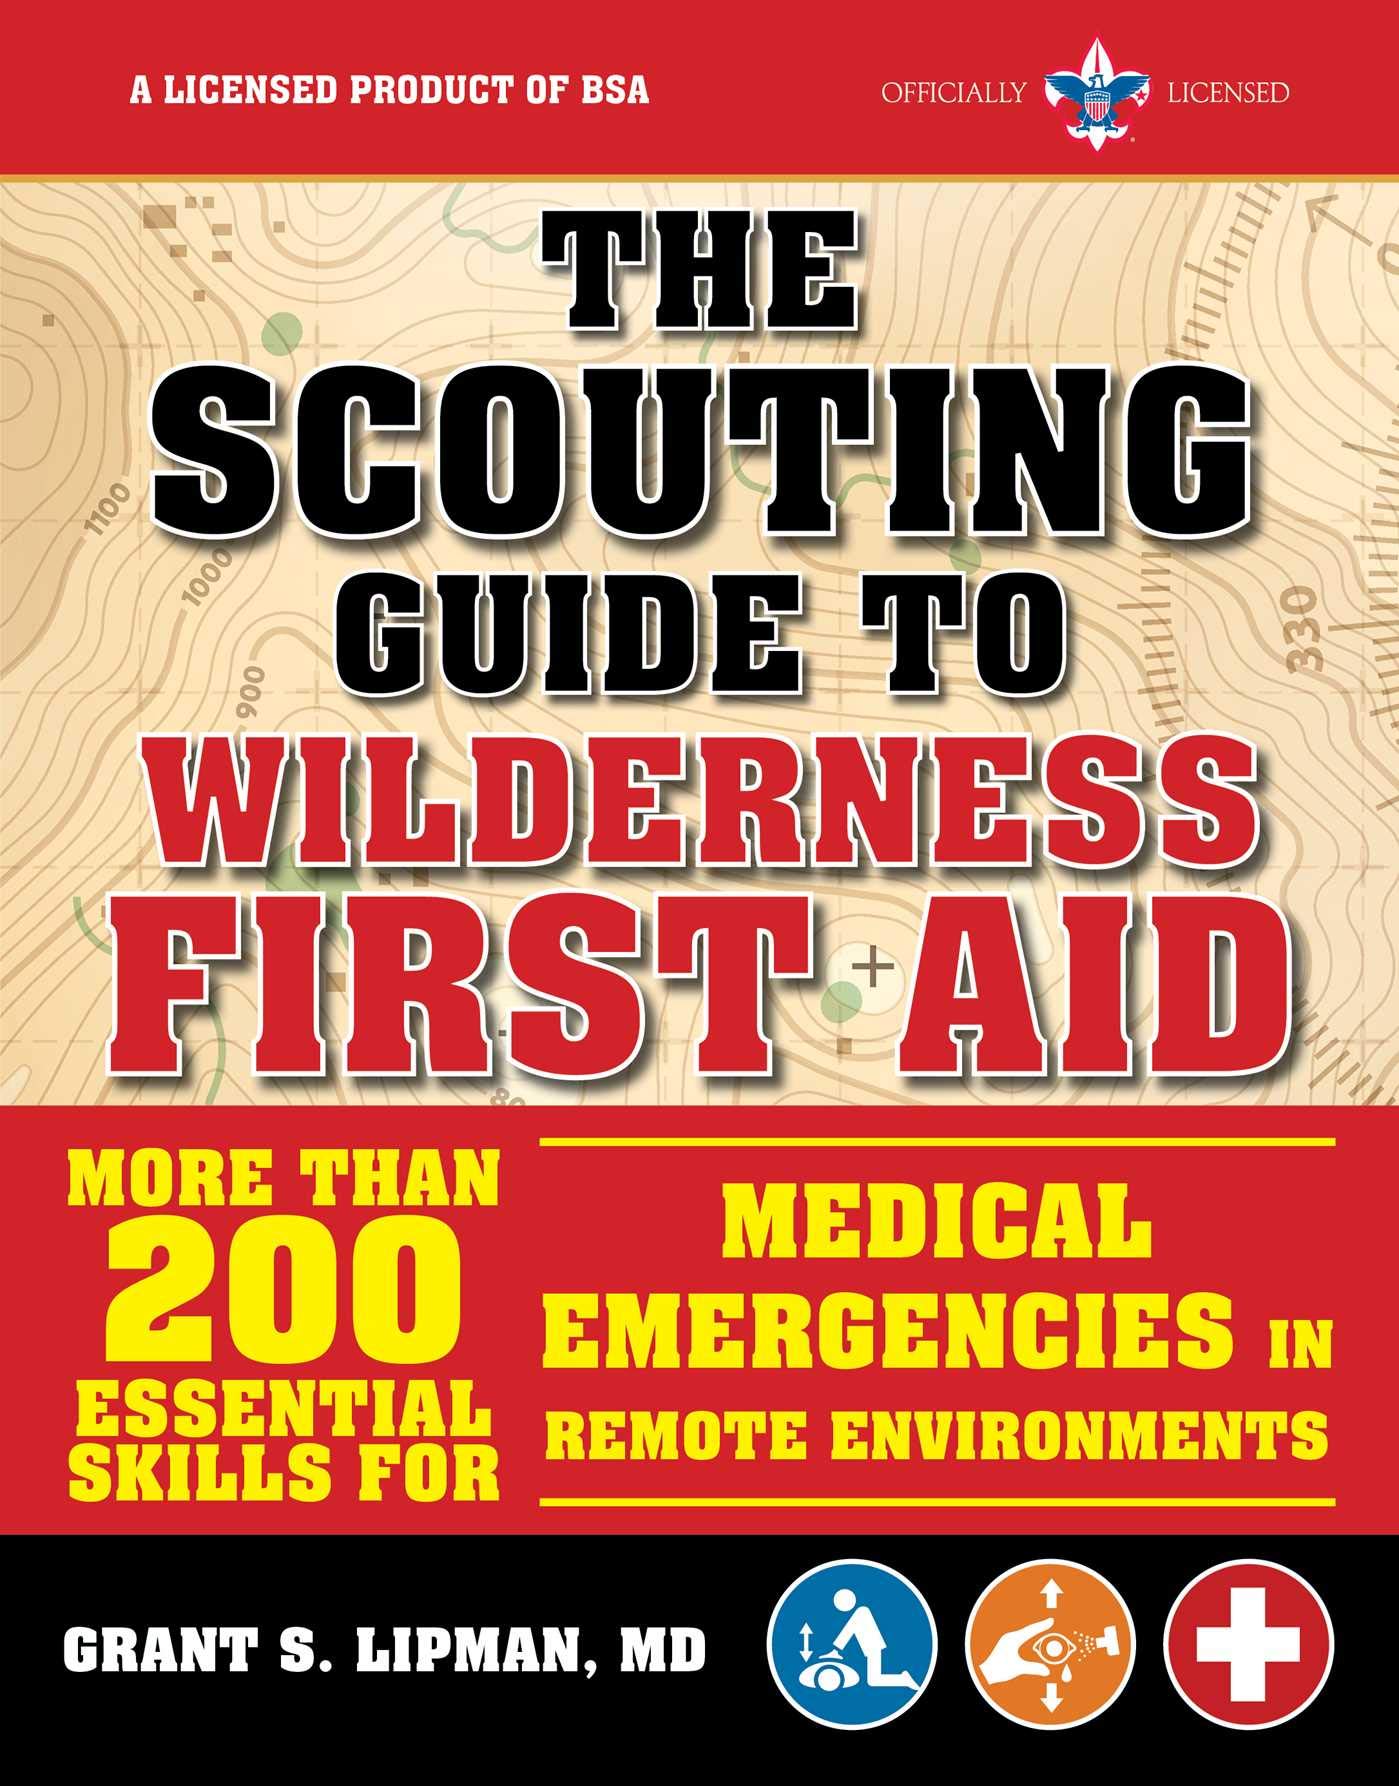 The Scouting Guide to Wilderness First Aid: An Officially-Licensed Book of the Boy Scouts of America: More than 200 Essential Skills for Medical Emergencies ... Remote Environments (A BSA Scouting Guide)